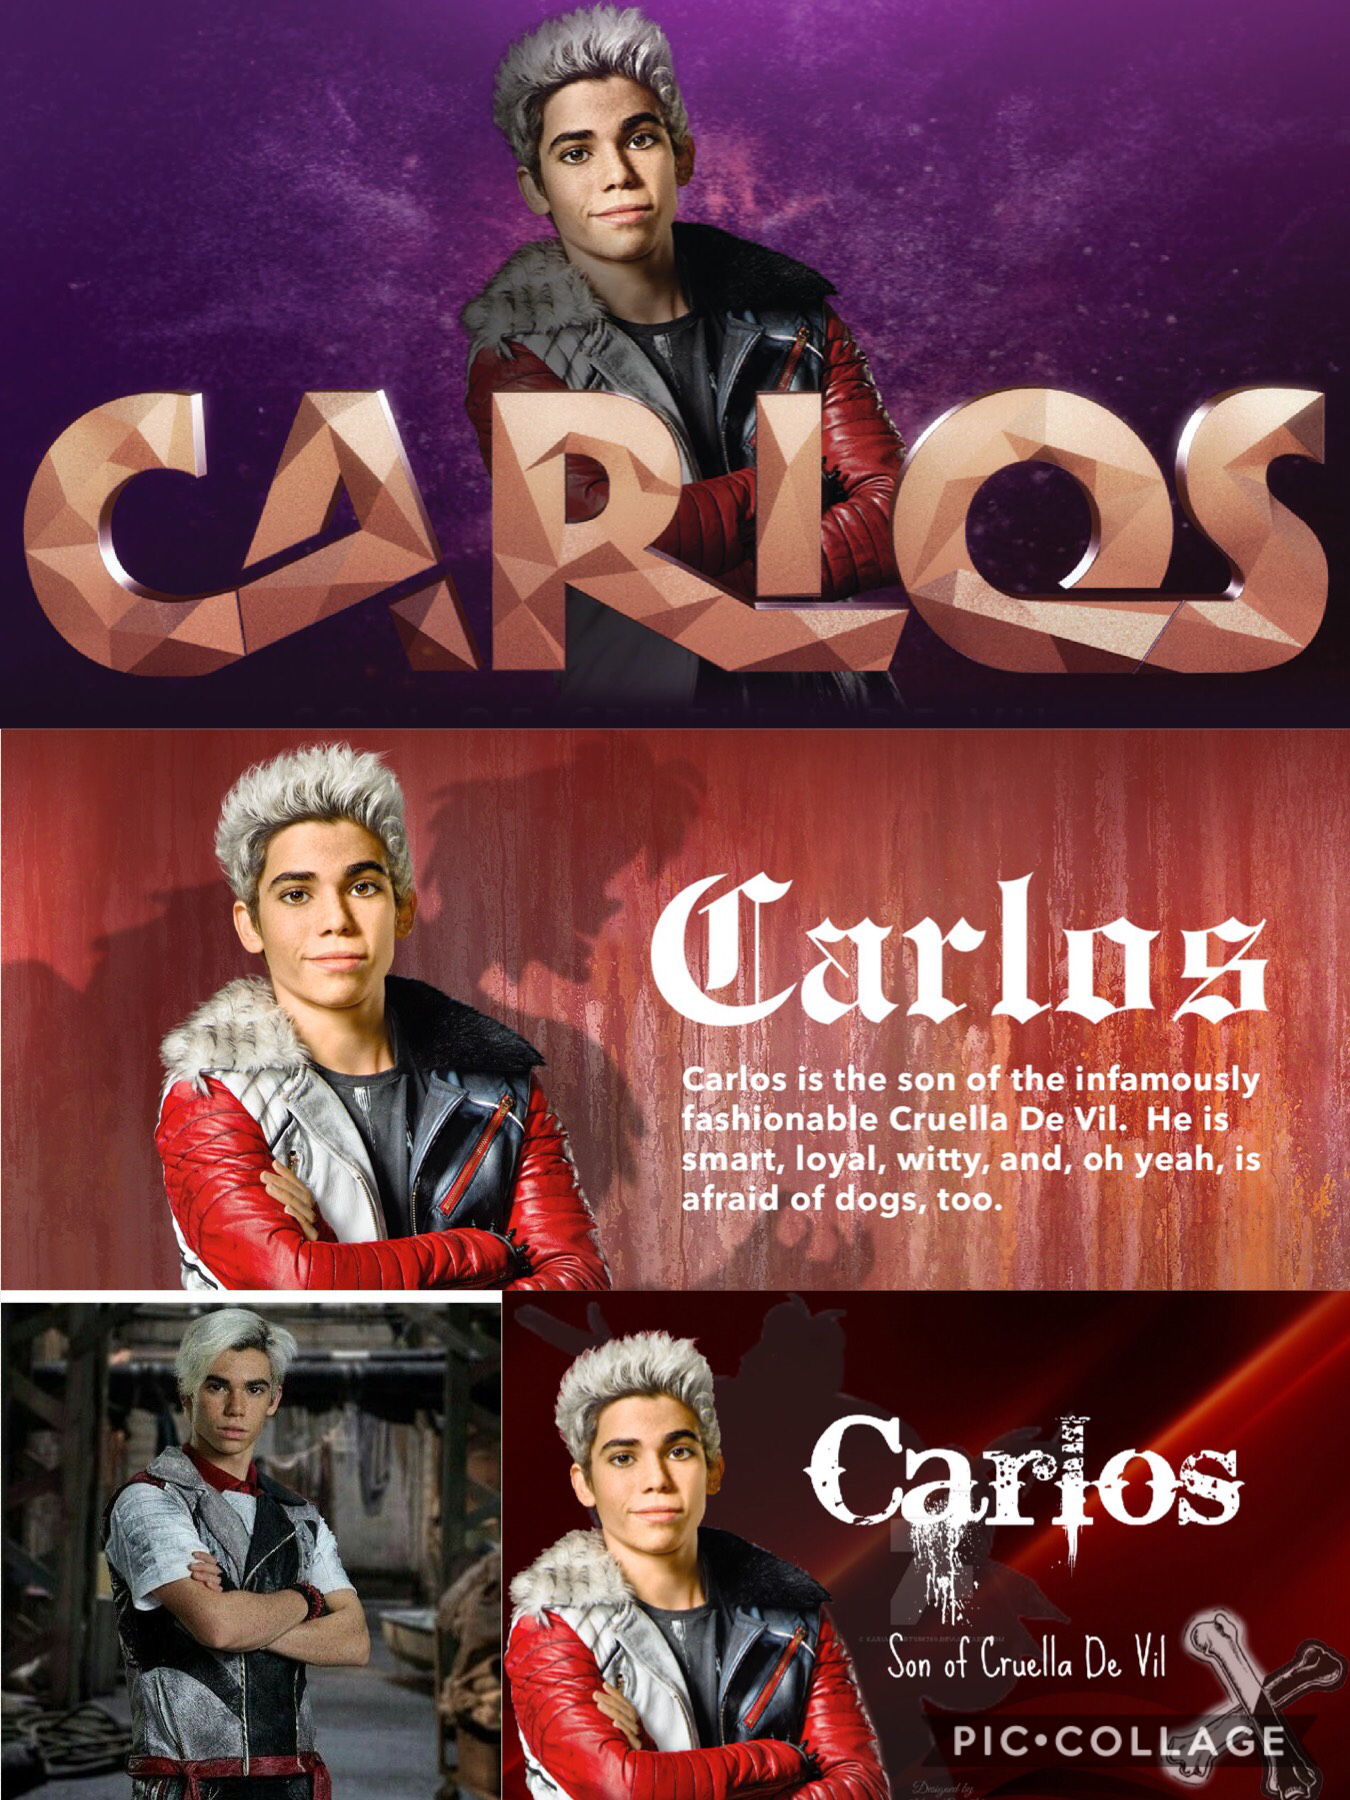 Carlos is the best